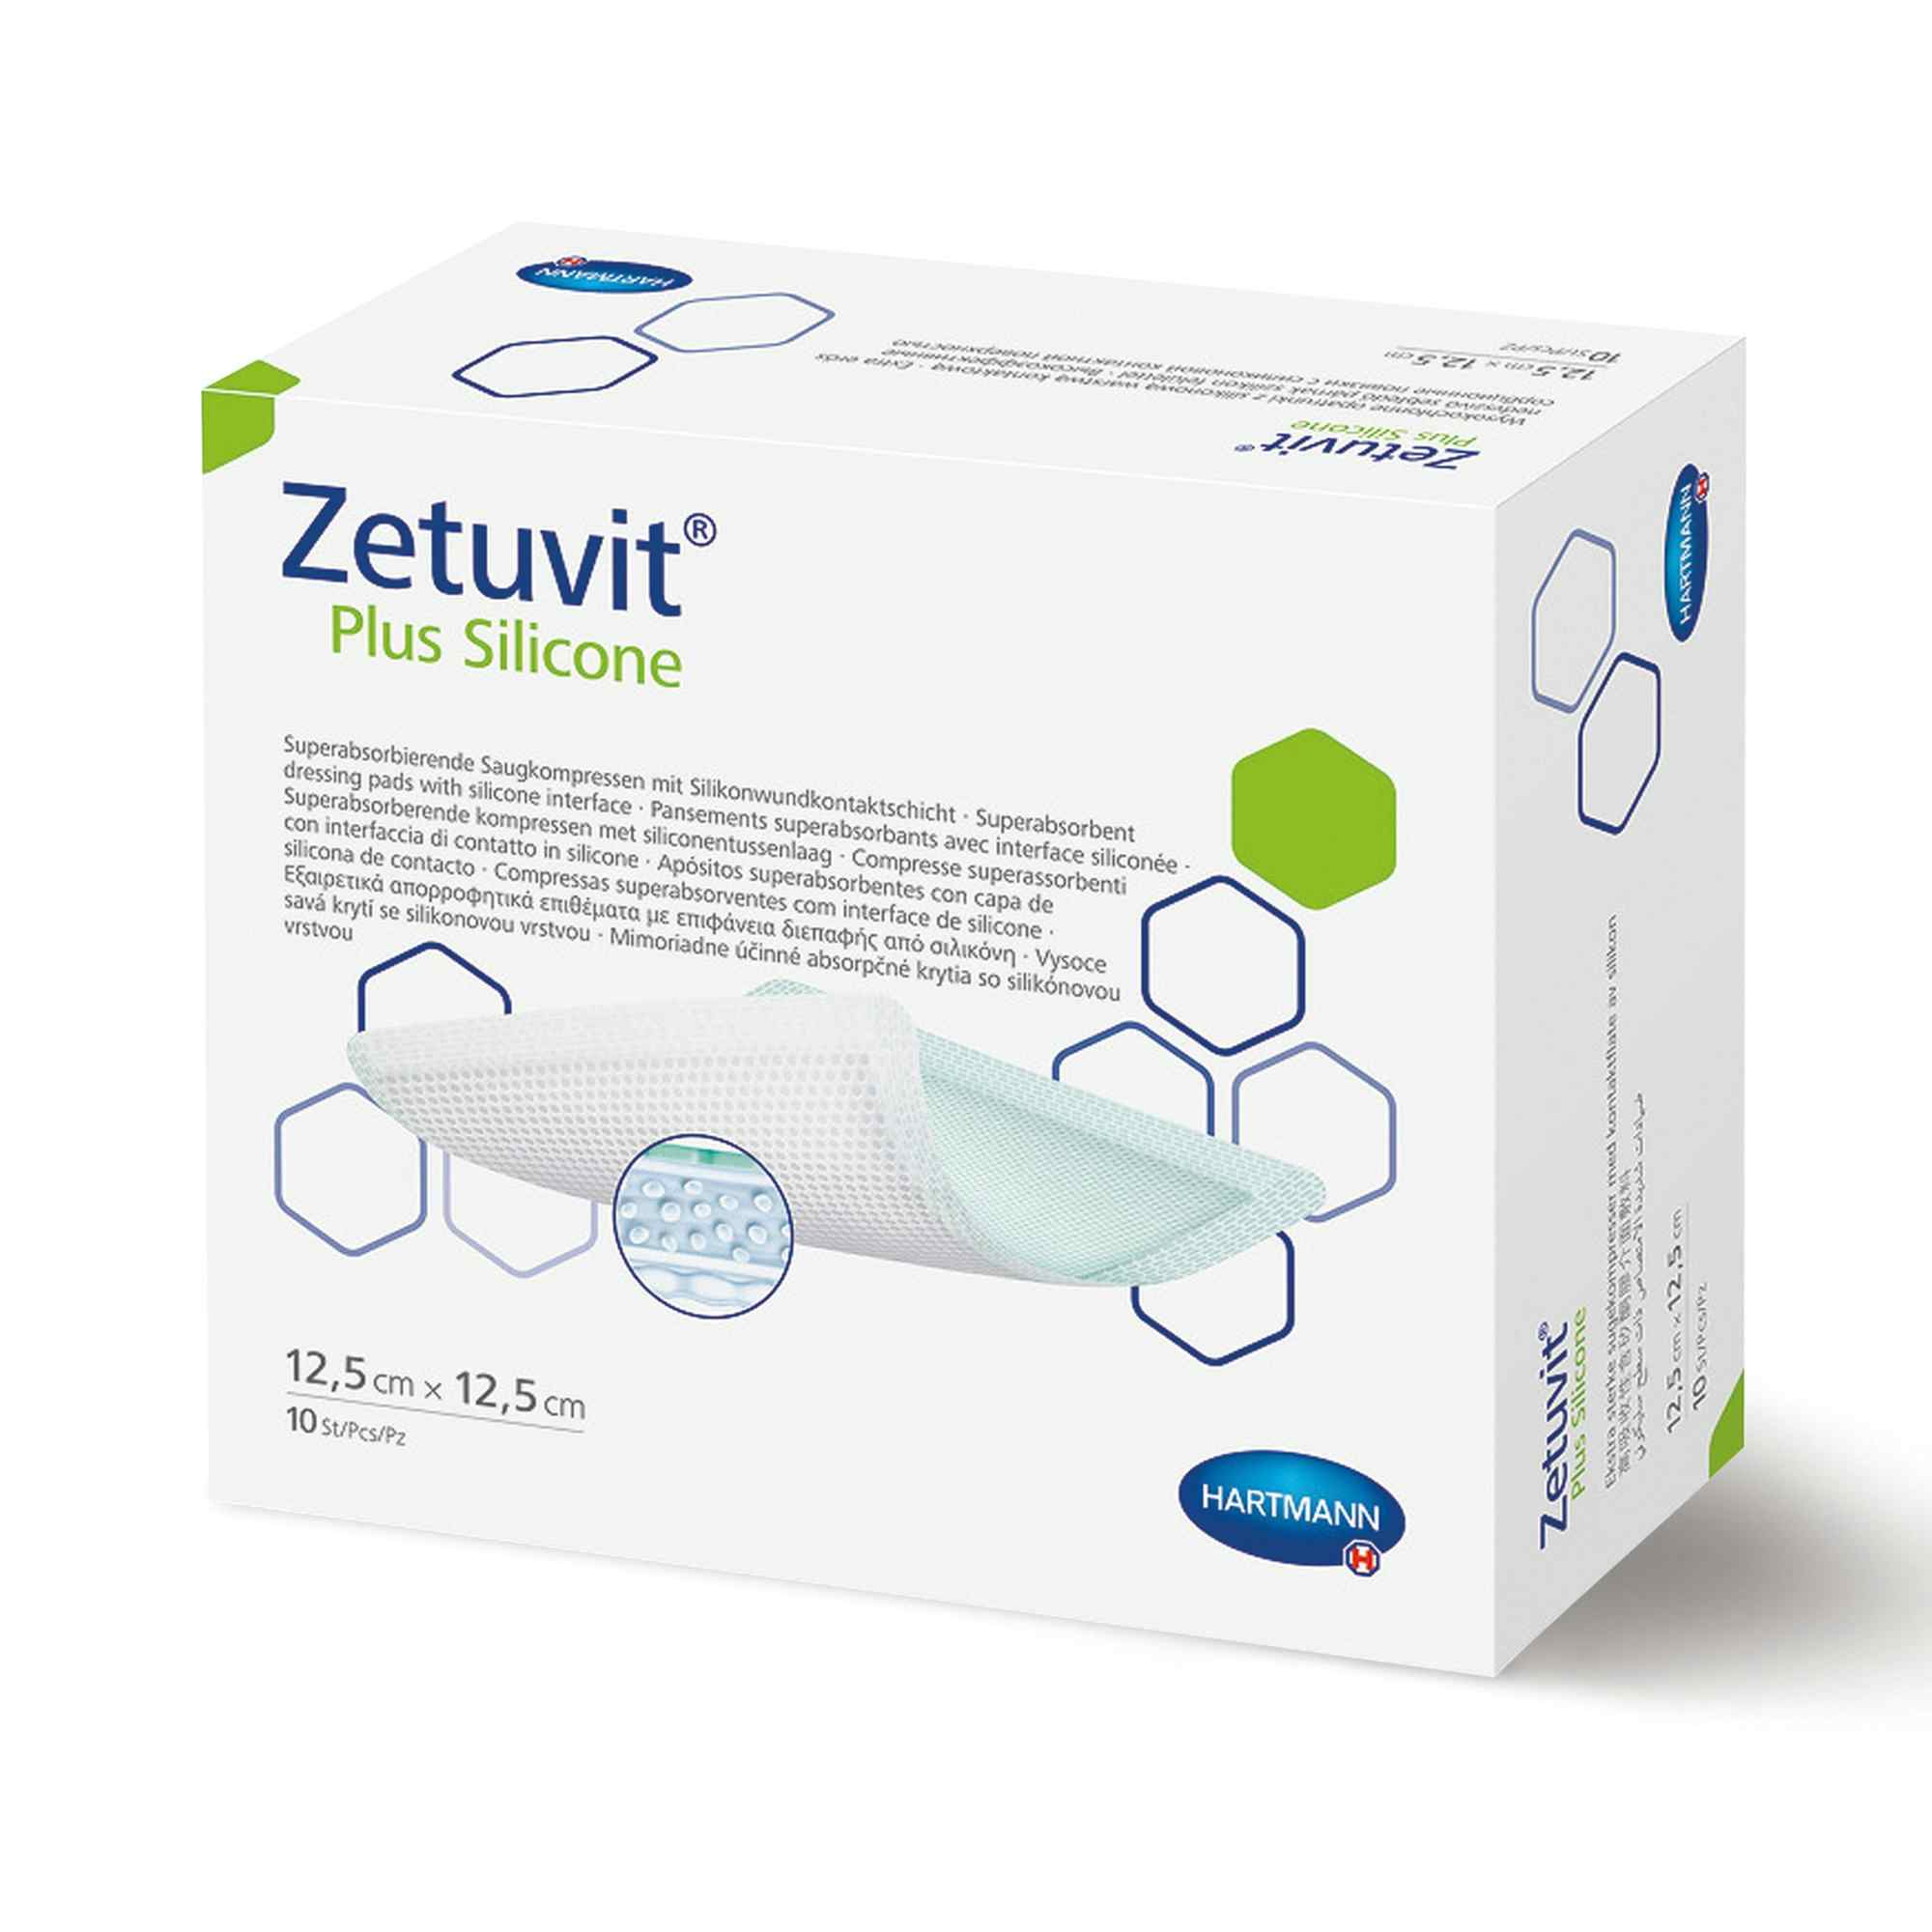 Zetuvit Plus Silicone Super Absorbent Dressing, 3 X 3", 413114, Box of 10